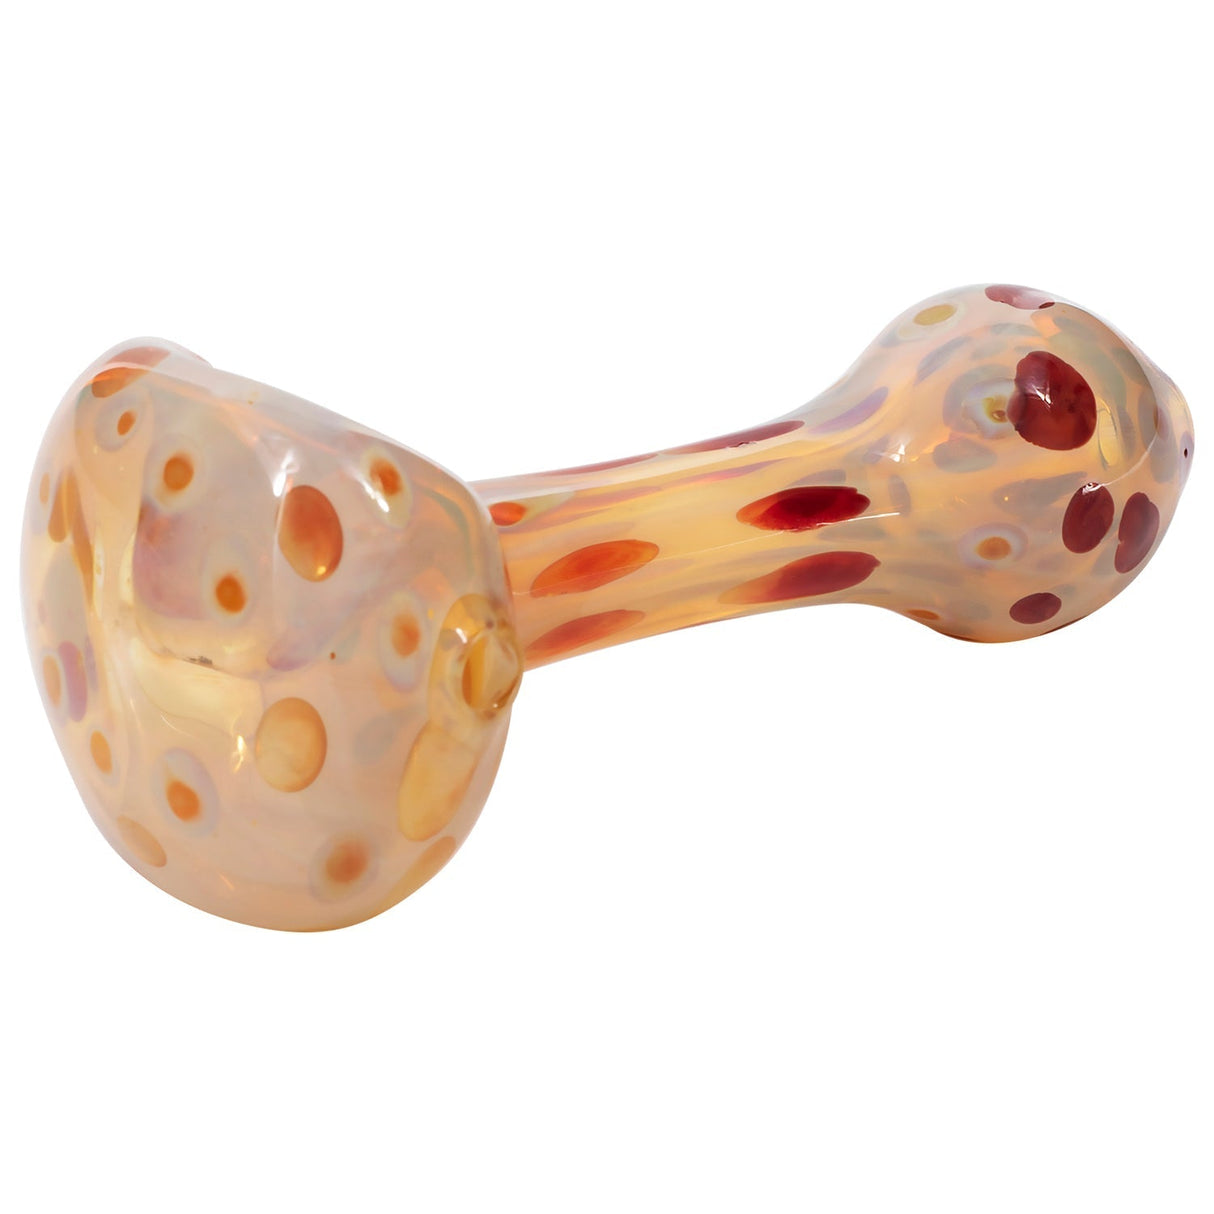 LA Pipes Polka Dot Glass Spoon Pipe, Assorted Colors, Side View on White Background